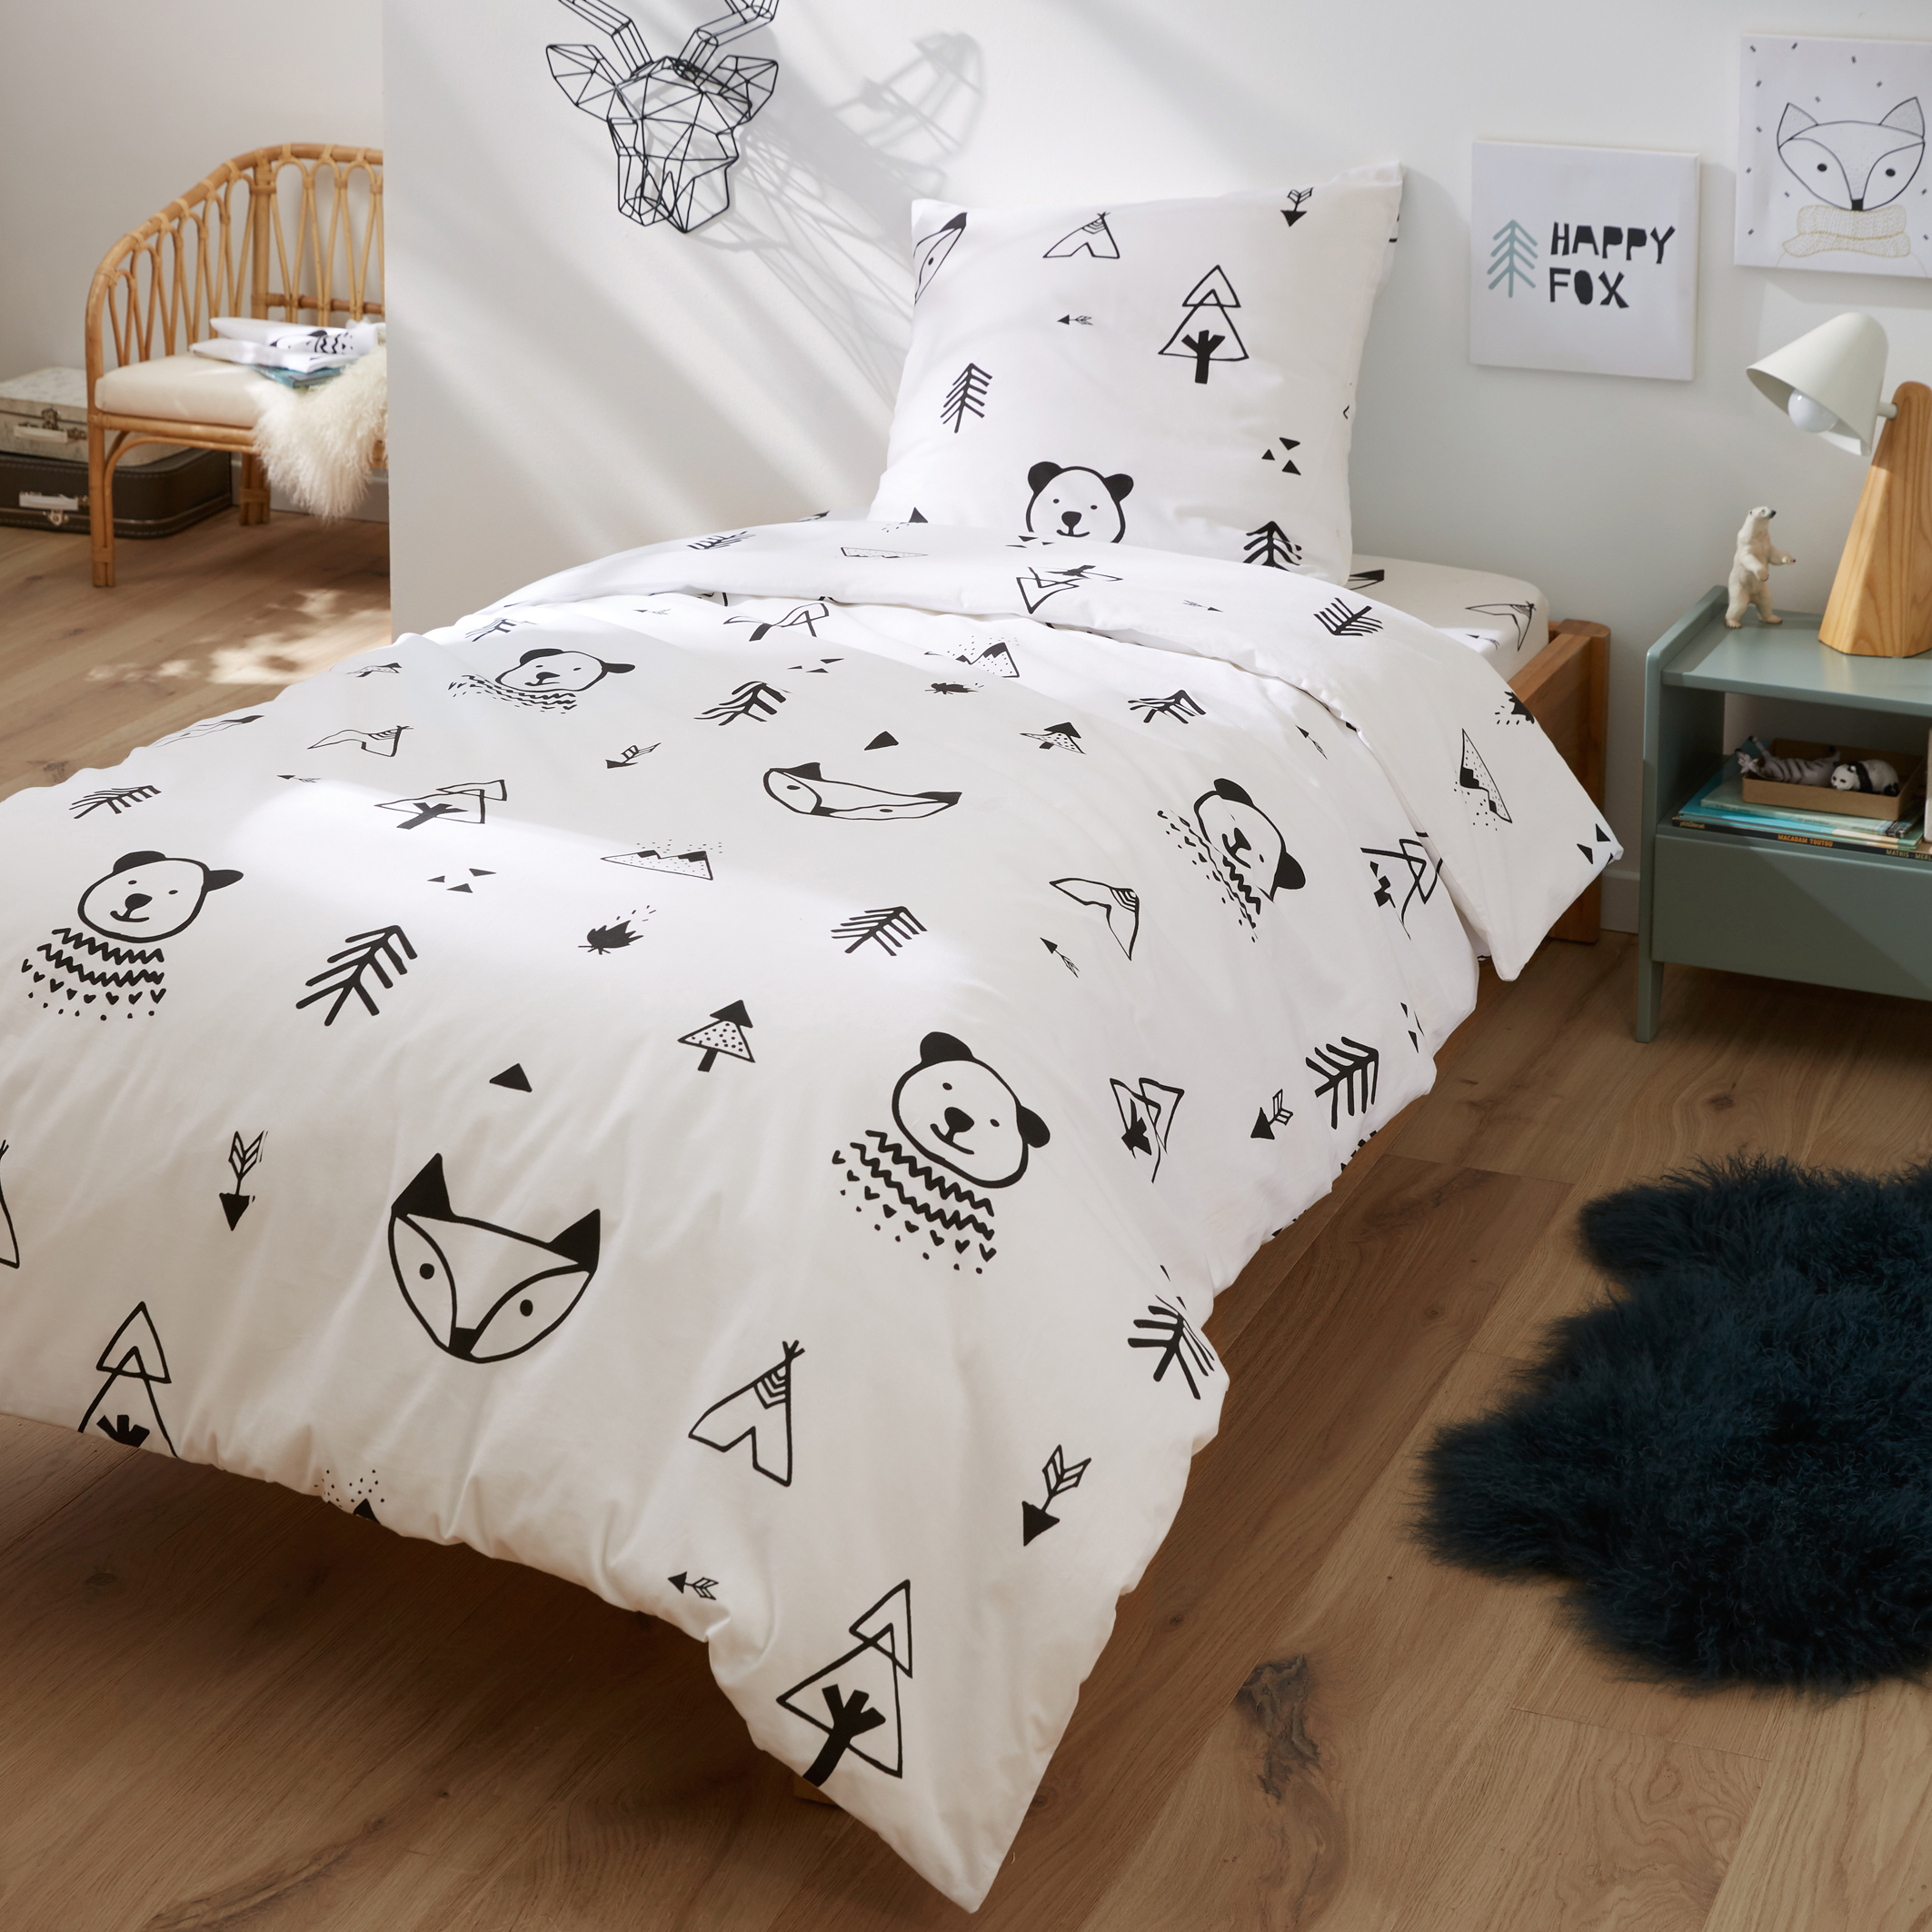 Forest Camp Printed Cotton Duvet Cover, Forest Print Duvet Cover